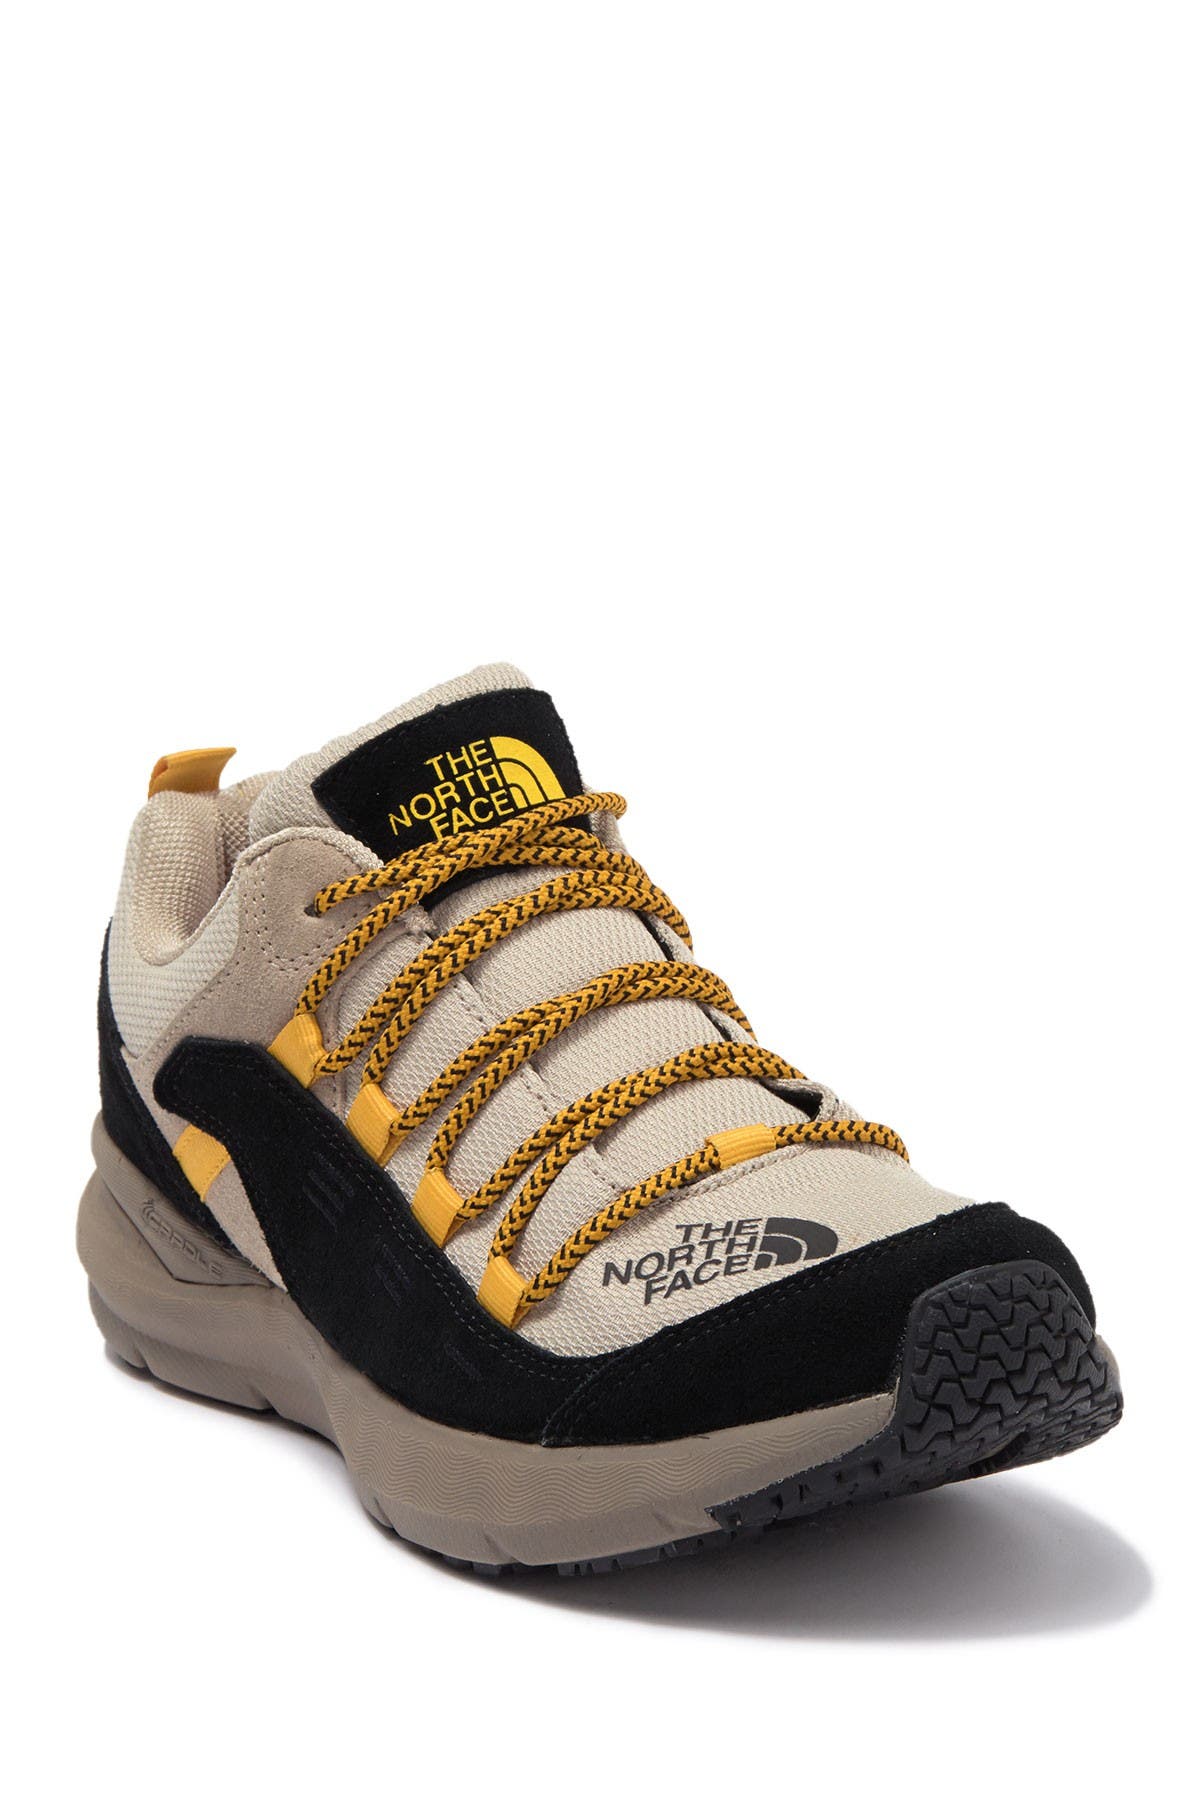 north face mountain sneakers